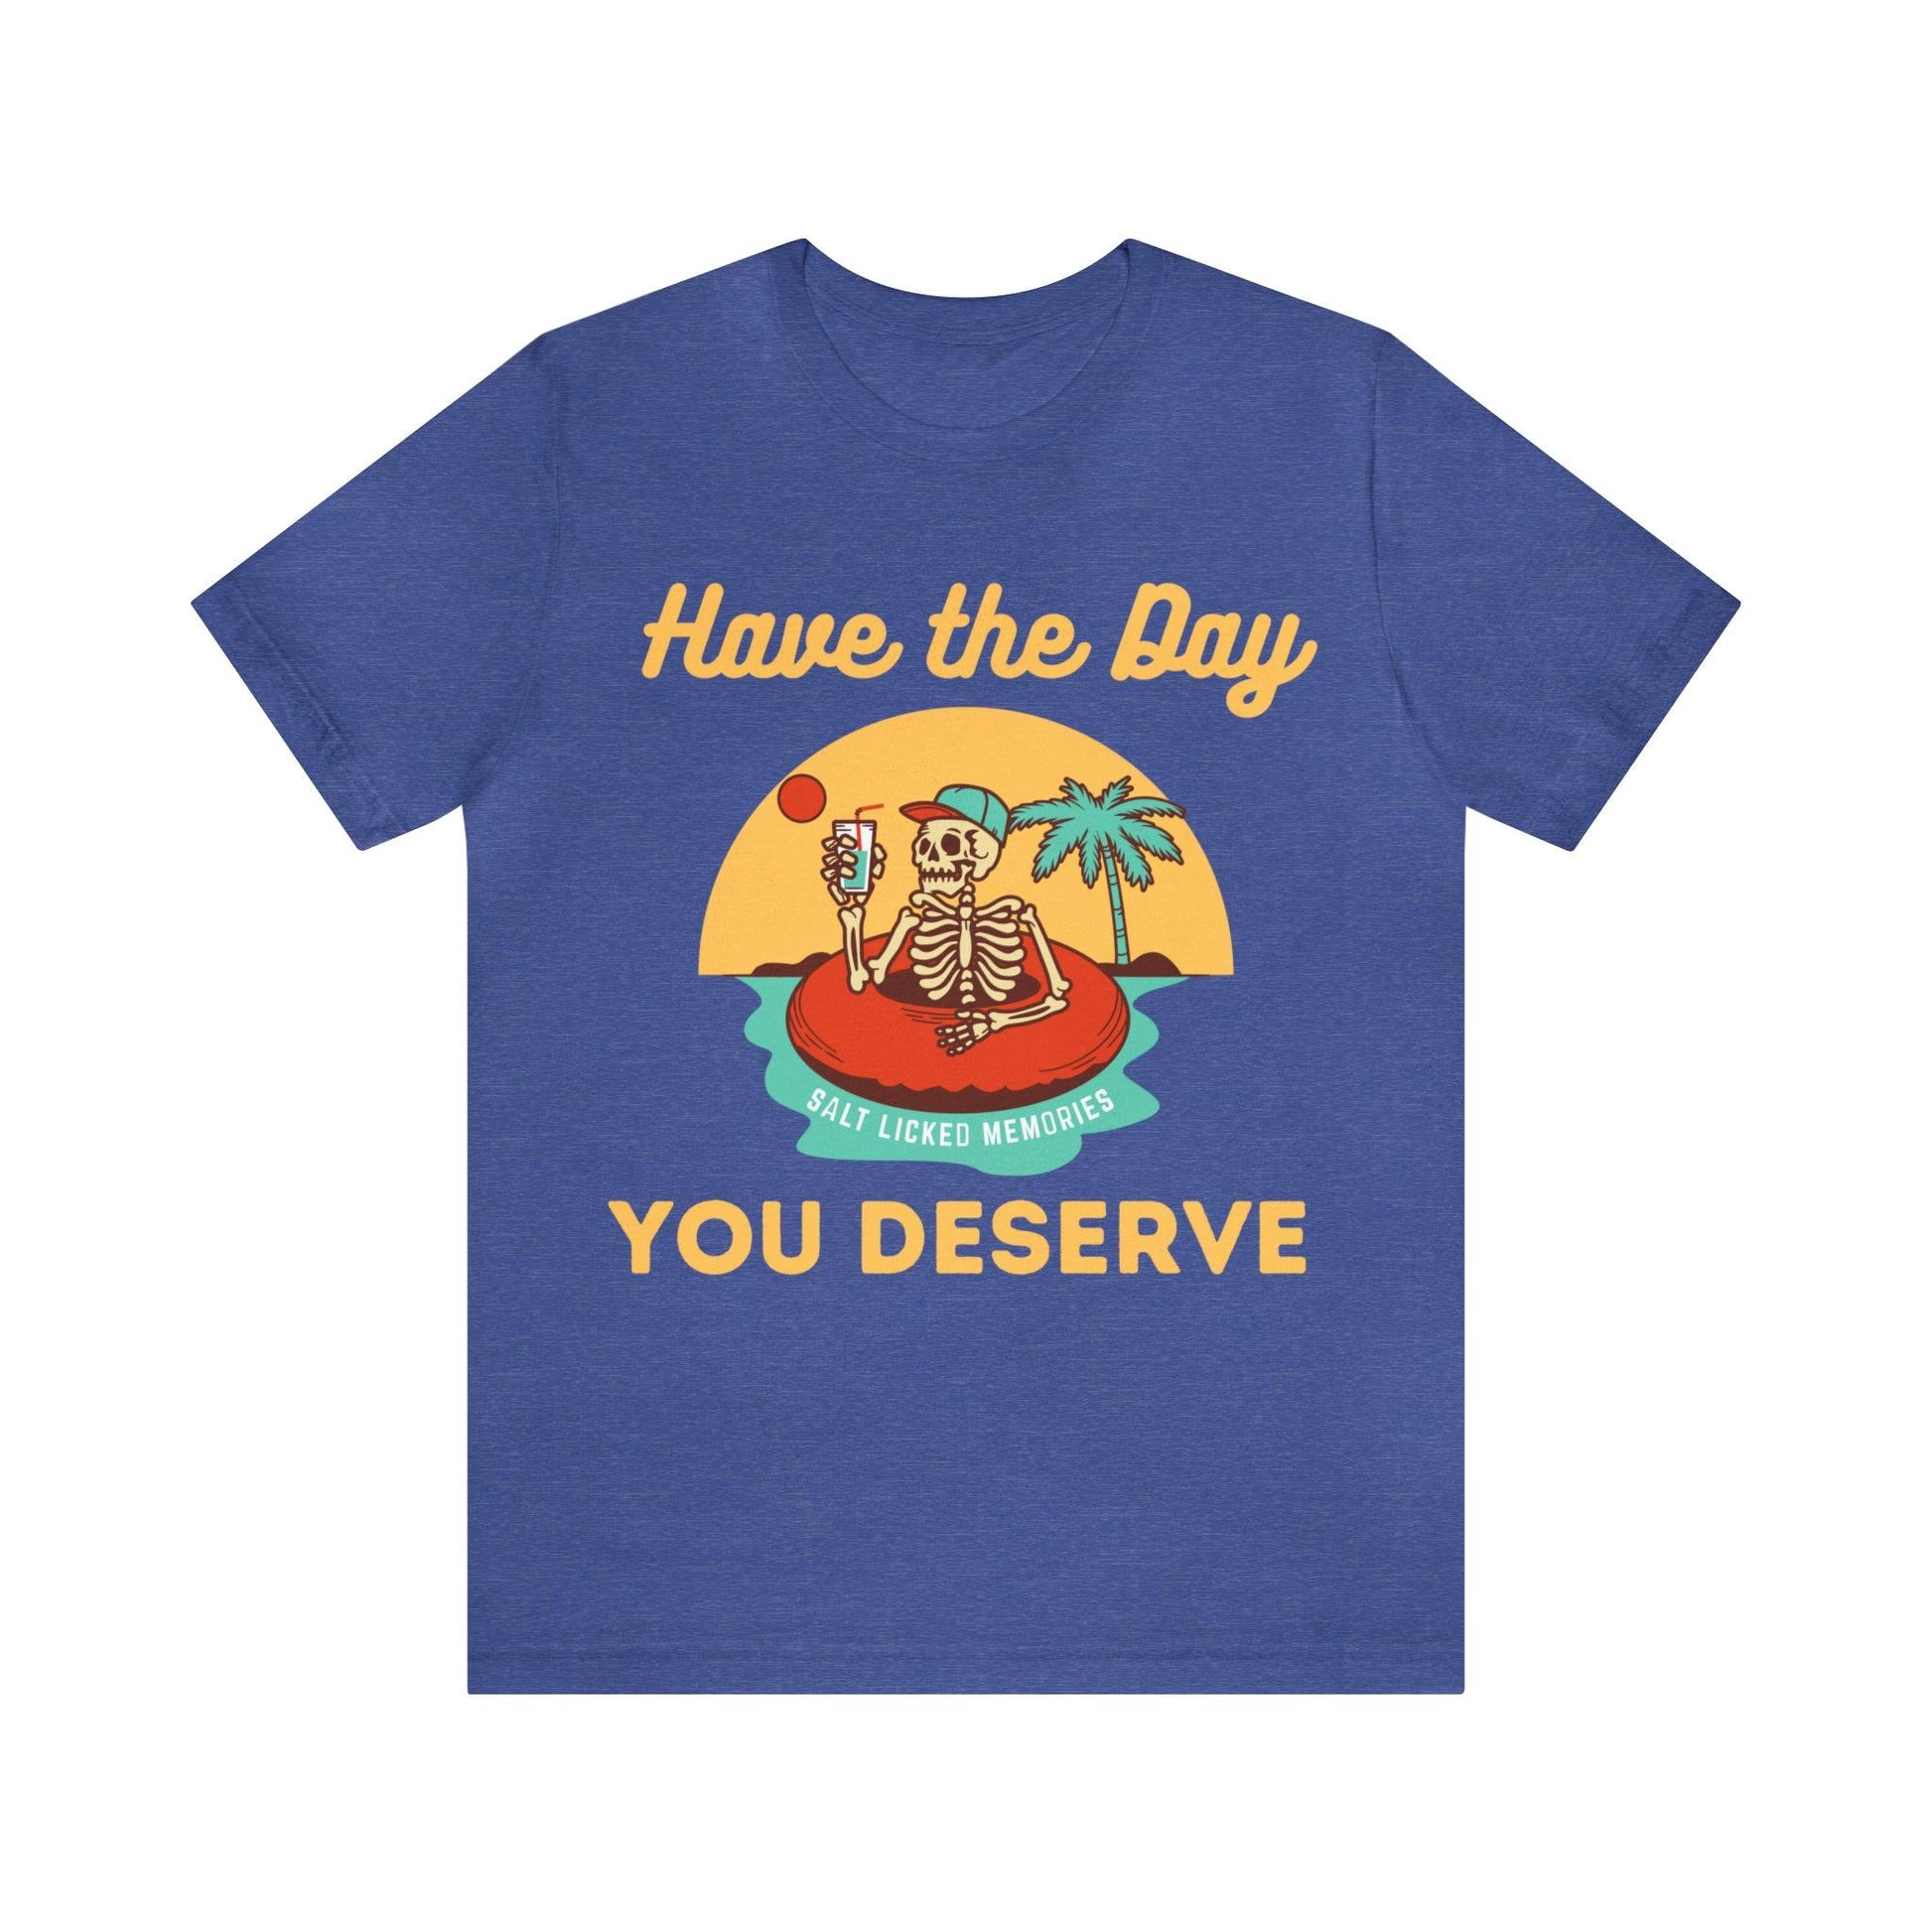 Have the Day You Deserve Shirt, Inspirational Graphic Tee, Motivational Tee, Positive Vibes Shirt, Trendy shirt and Eye Catching shirt - Giftsmojo